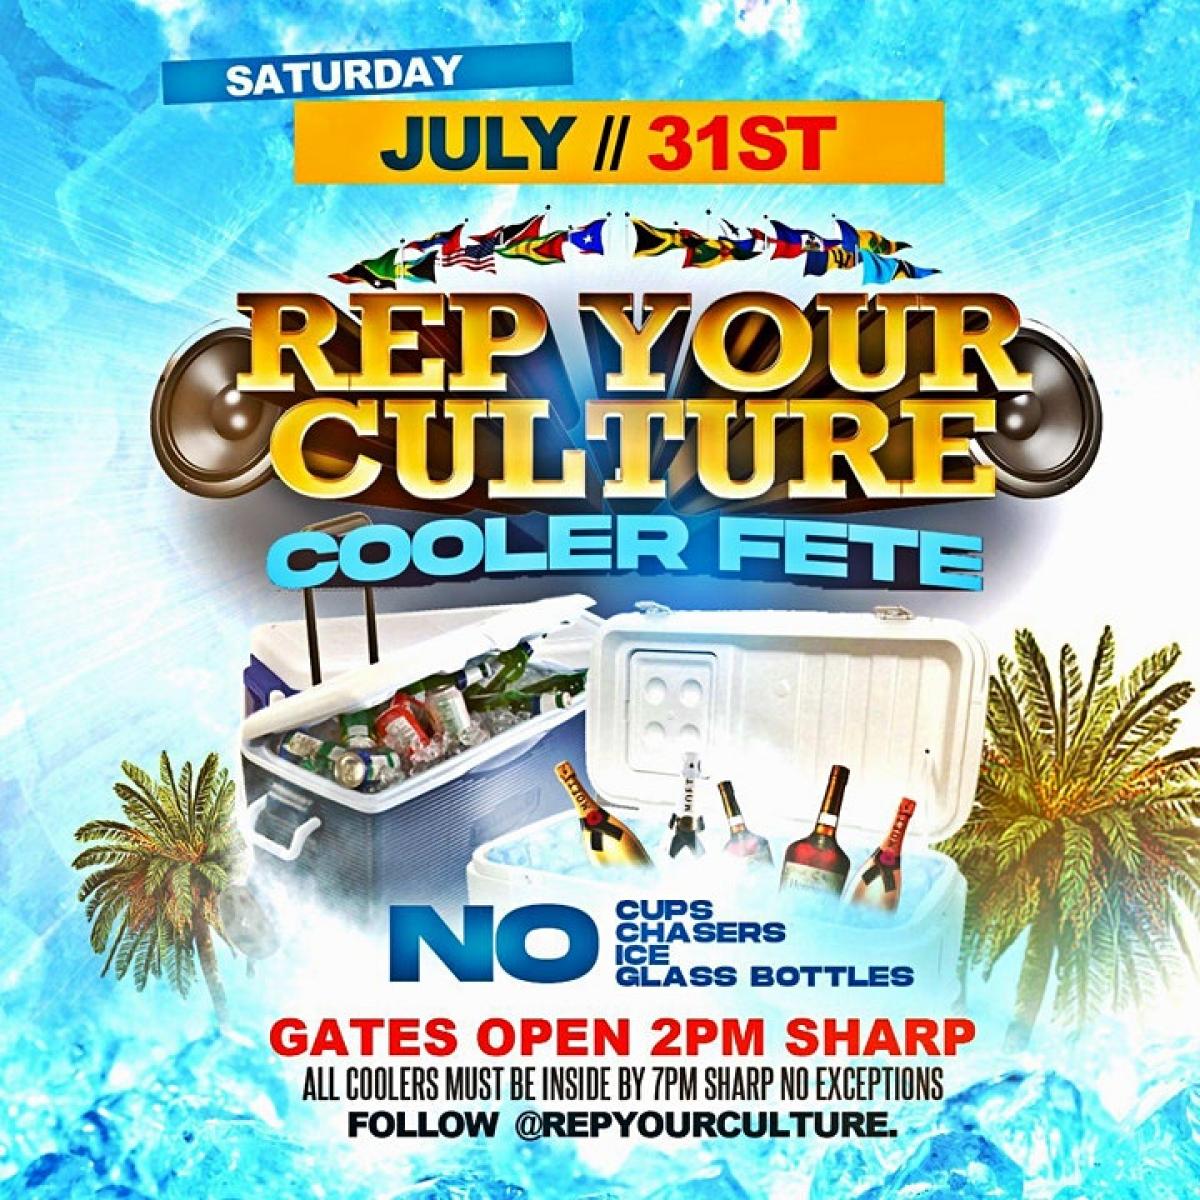 Rep Your Culture Cooler Fete flyer or graphic.